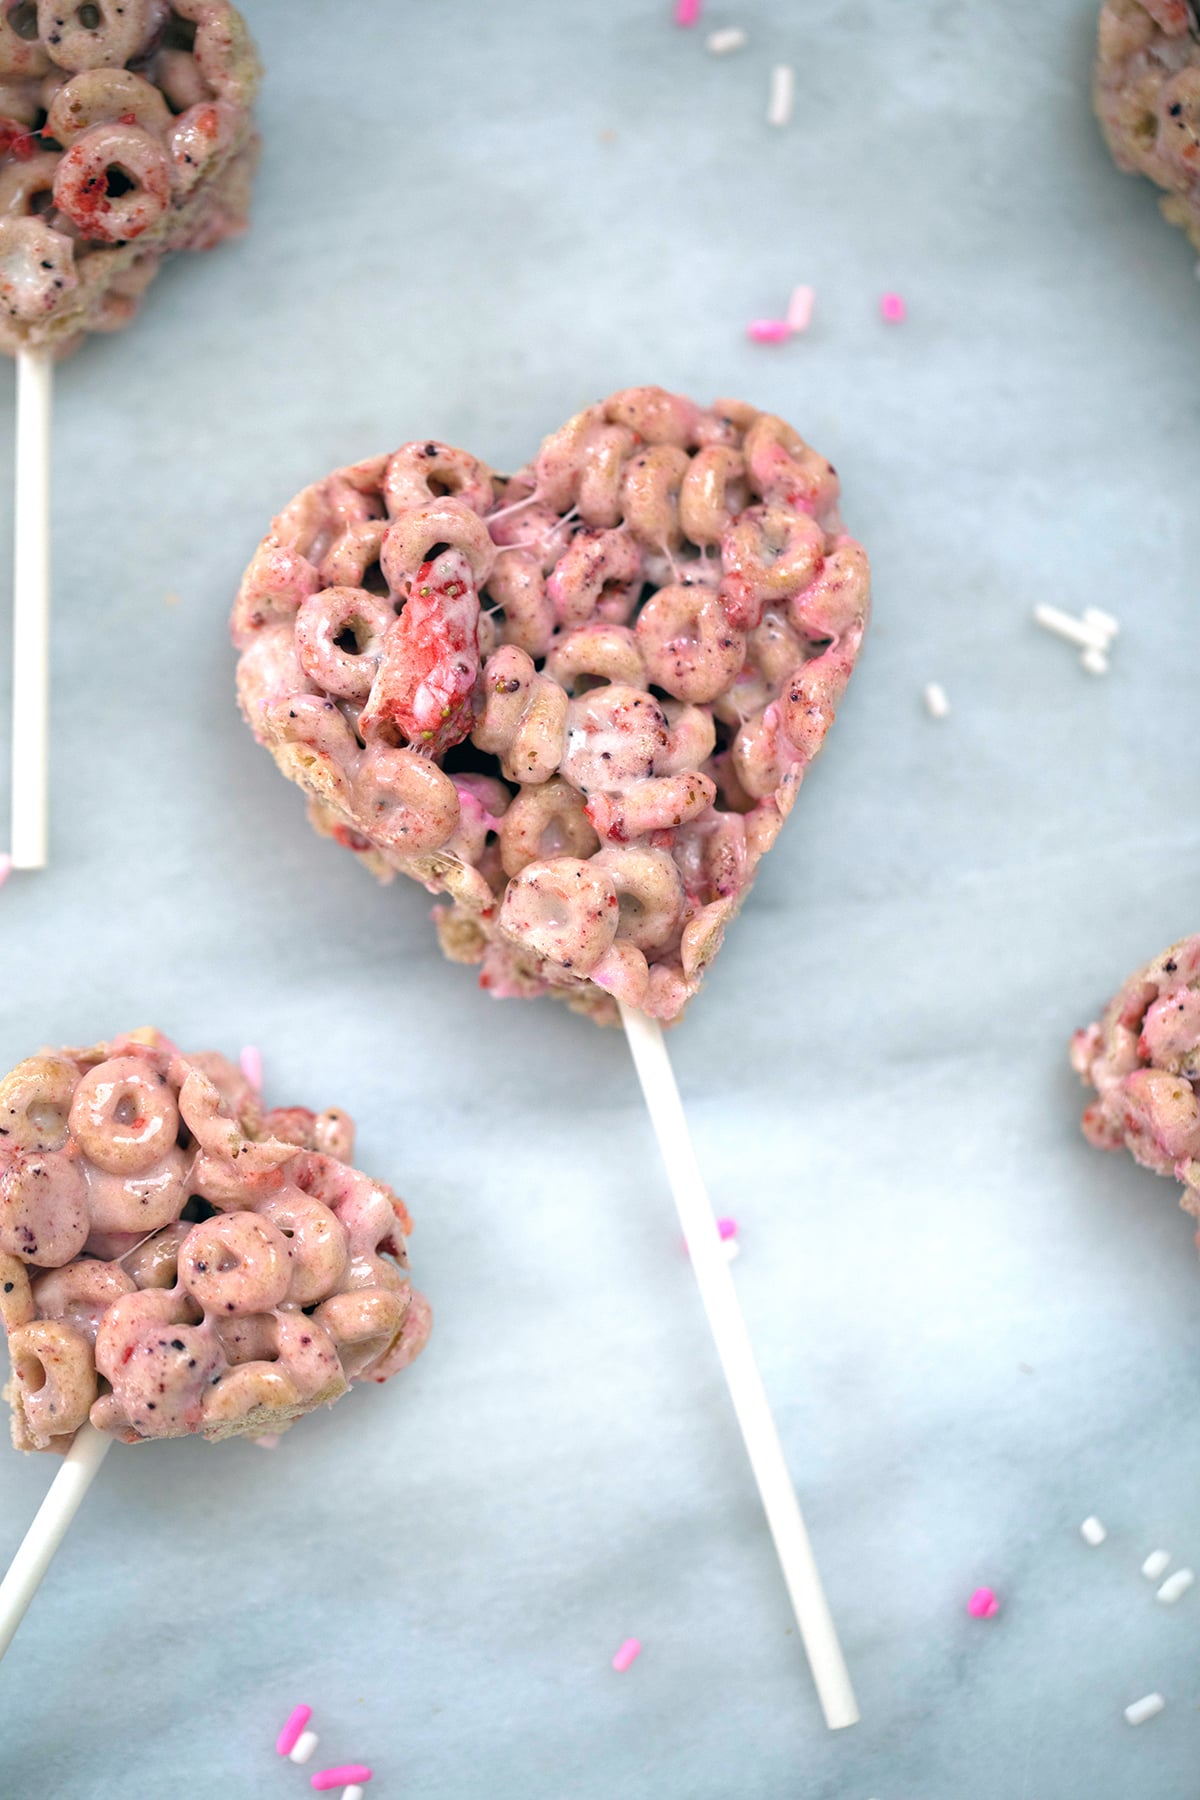 Overhead view of pink heart-shaped Very Berry Cheerios Treats on a popsicle stick on a marble surface.